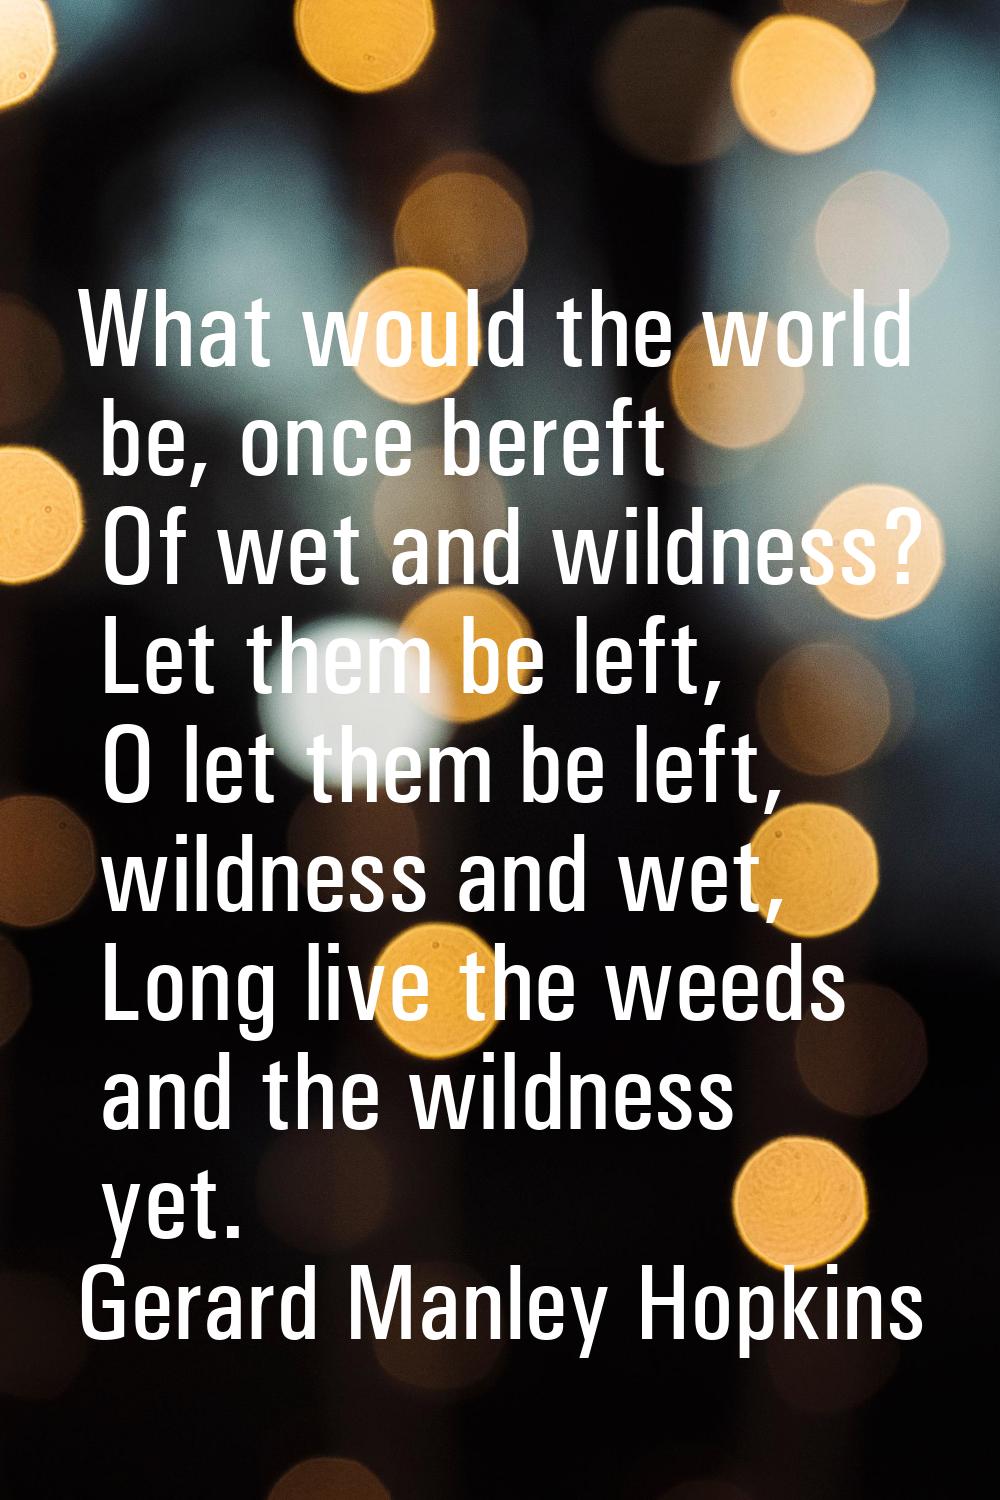 What would the world be, once bereft Of wet and wildness? Let them be left, O let them be left, wil